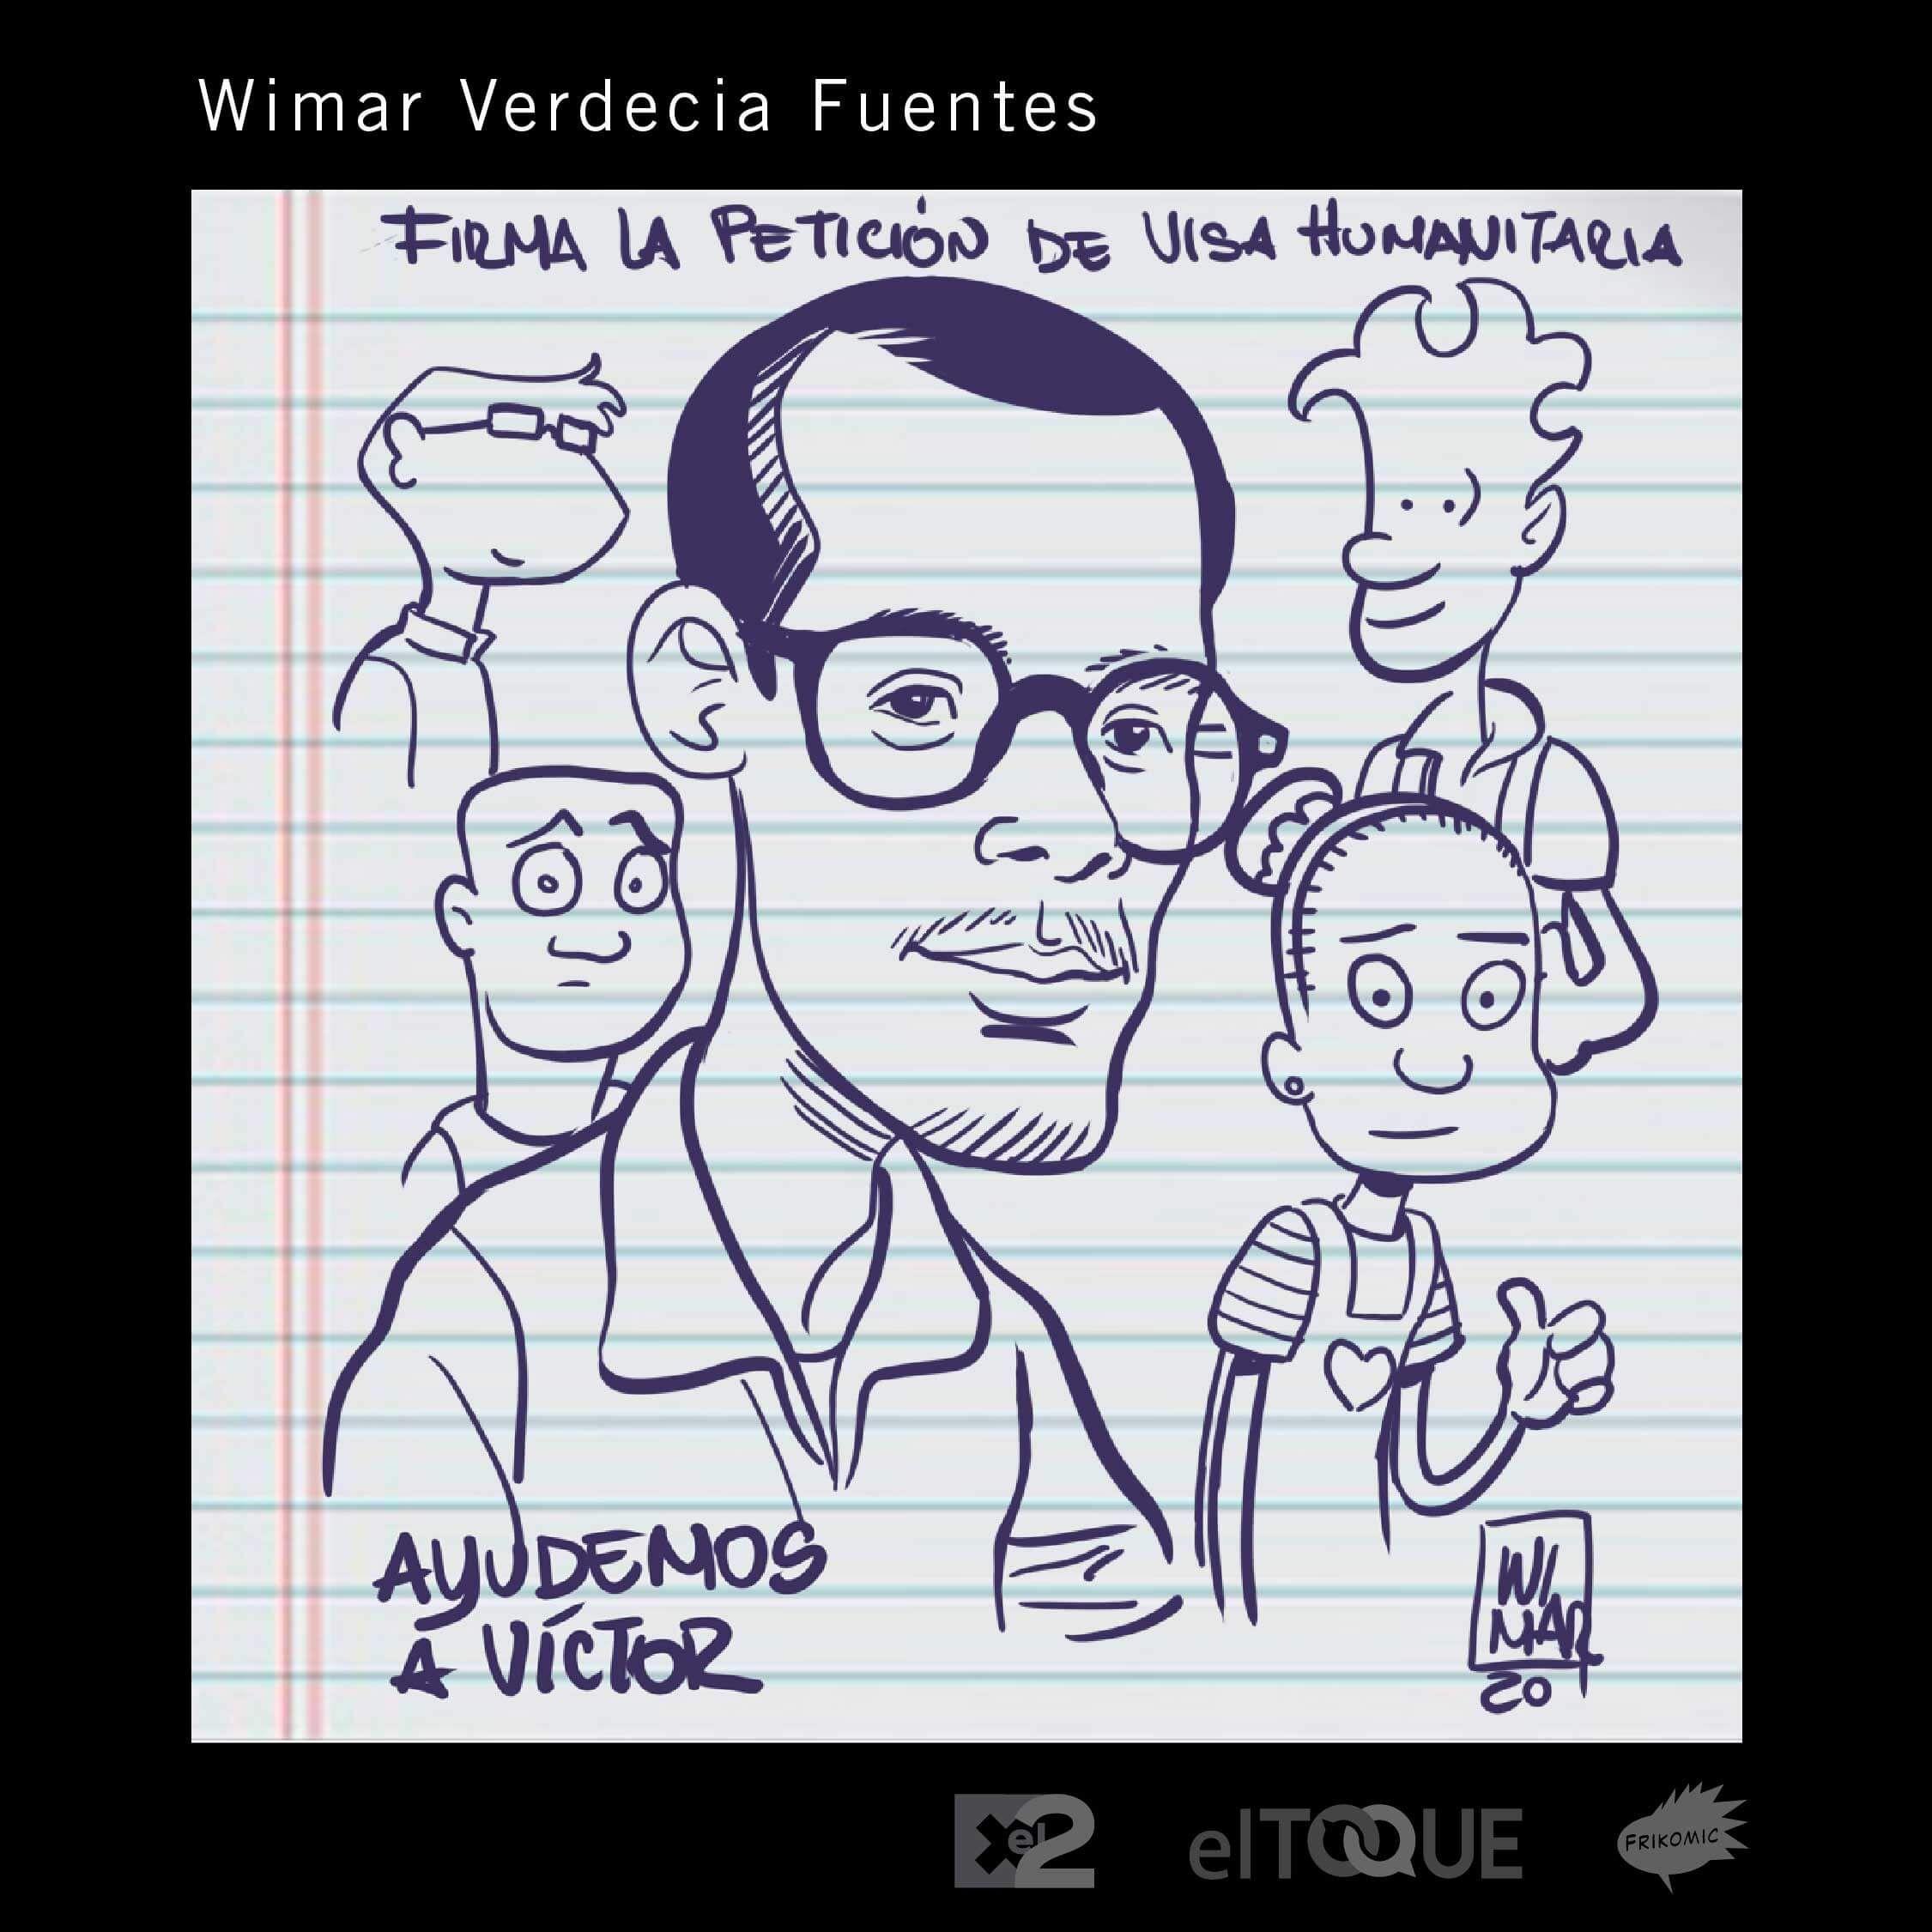 FUERZA-VITO-20-09-Verdecia-Wimar-VICTOR-ALFONSO-YESAPIN-GARCIA-WILLY-FILLY-XEL2-HUMOR-GRAFICO.jpg